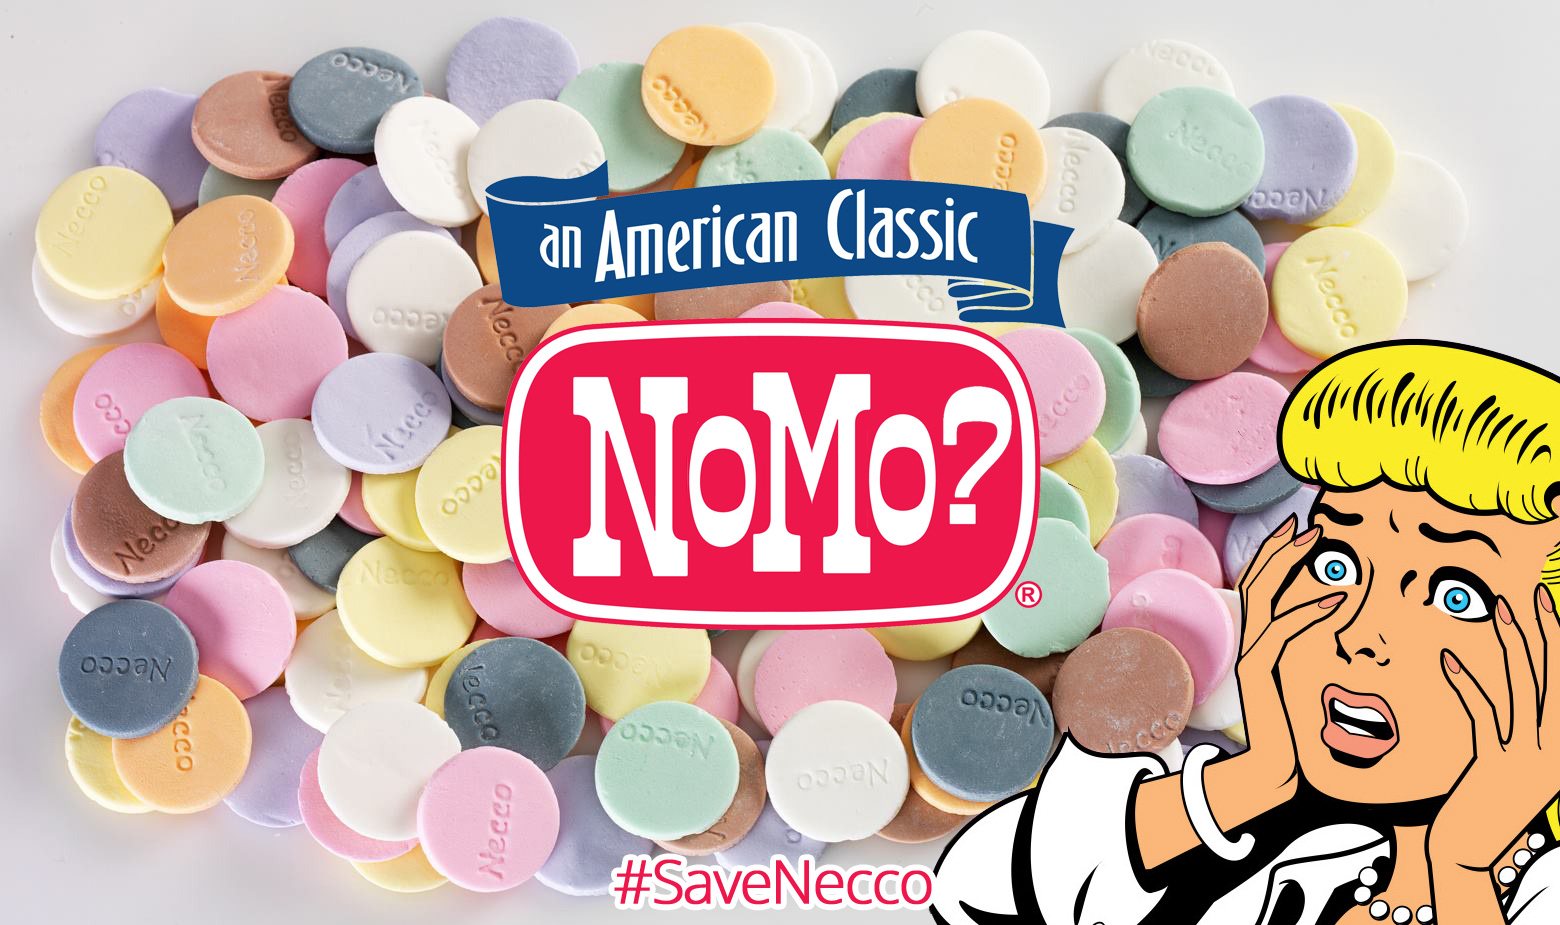 Save Necco. Necco Wafers Panic Buying from CandyStore.com